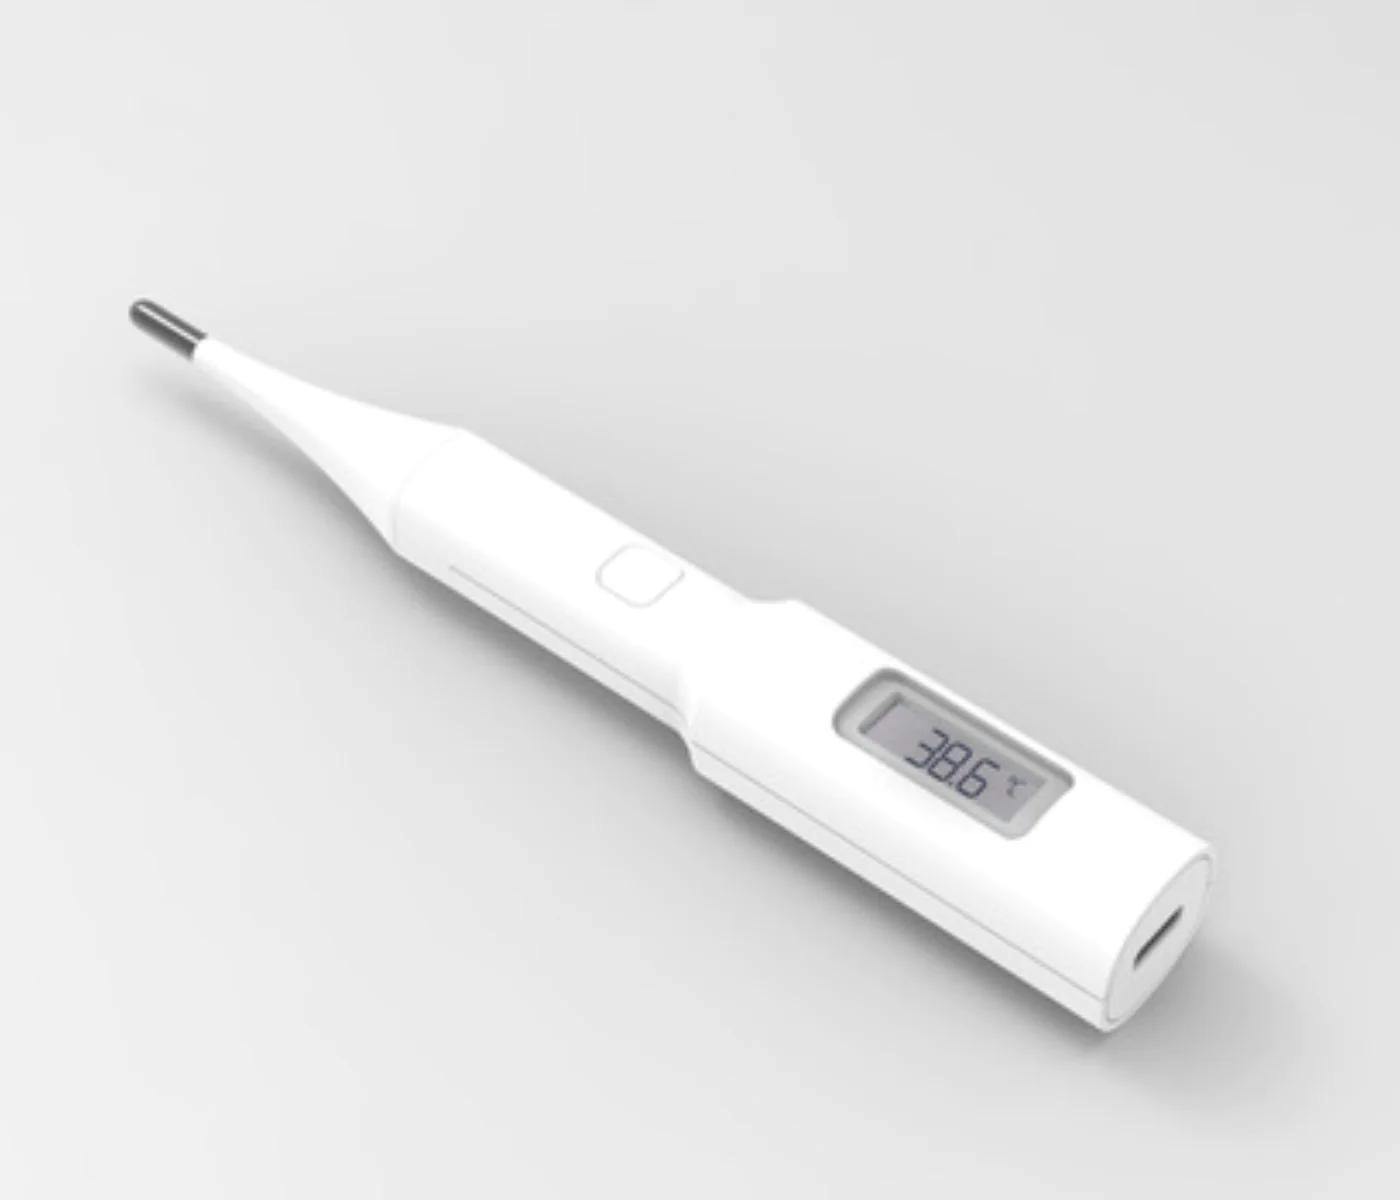 Mella Pet Care underarm pet thermometer now available in Australia